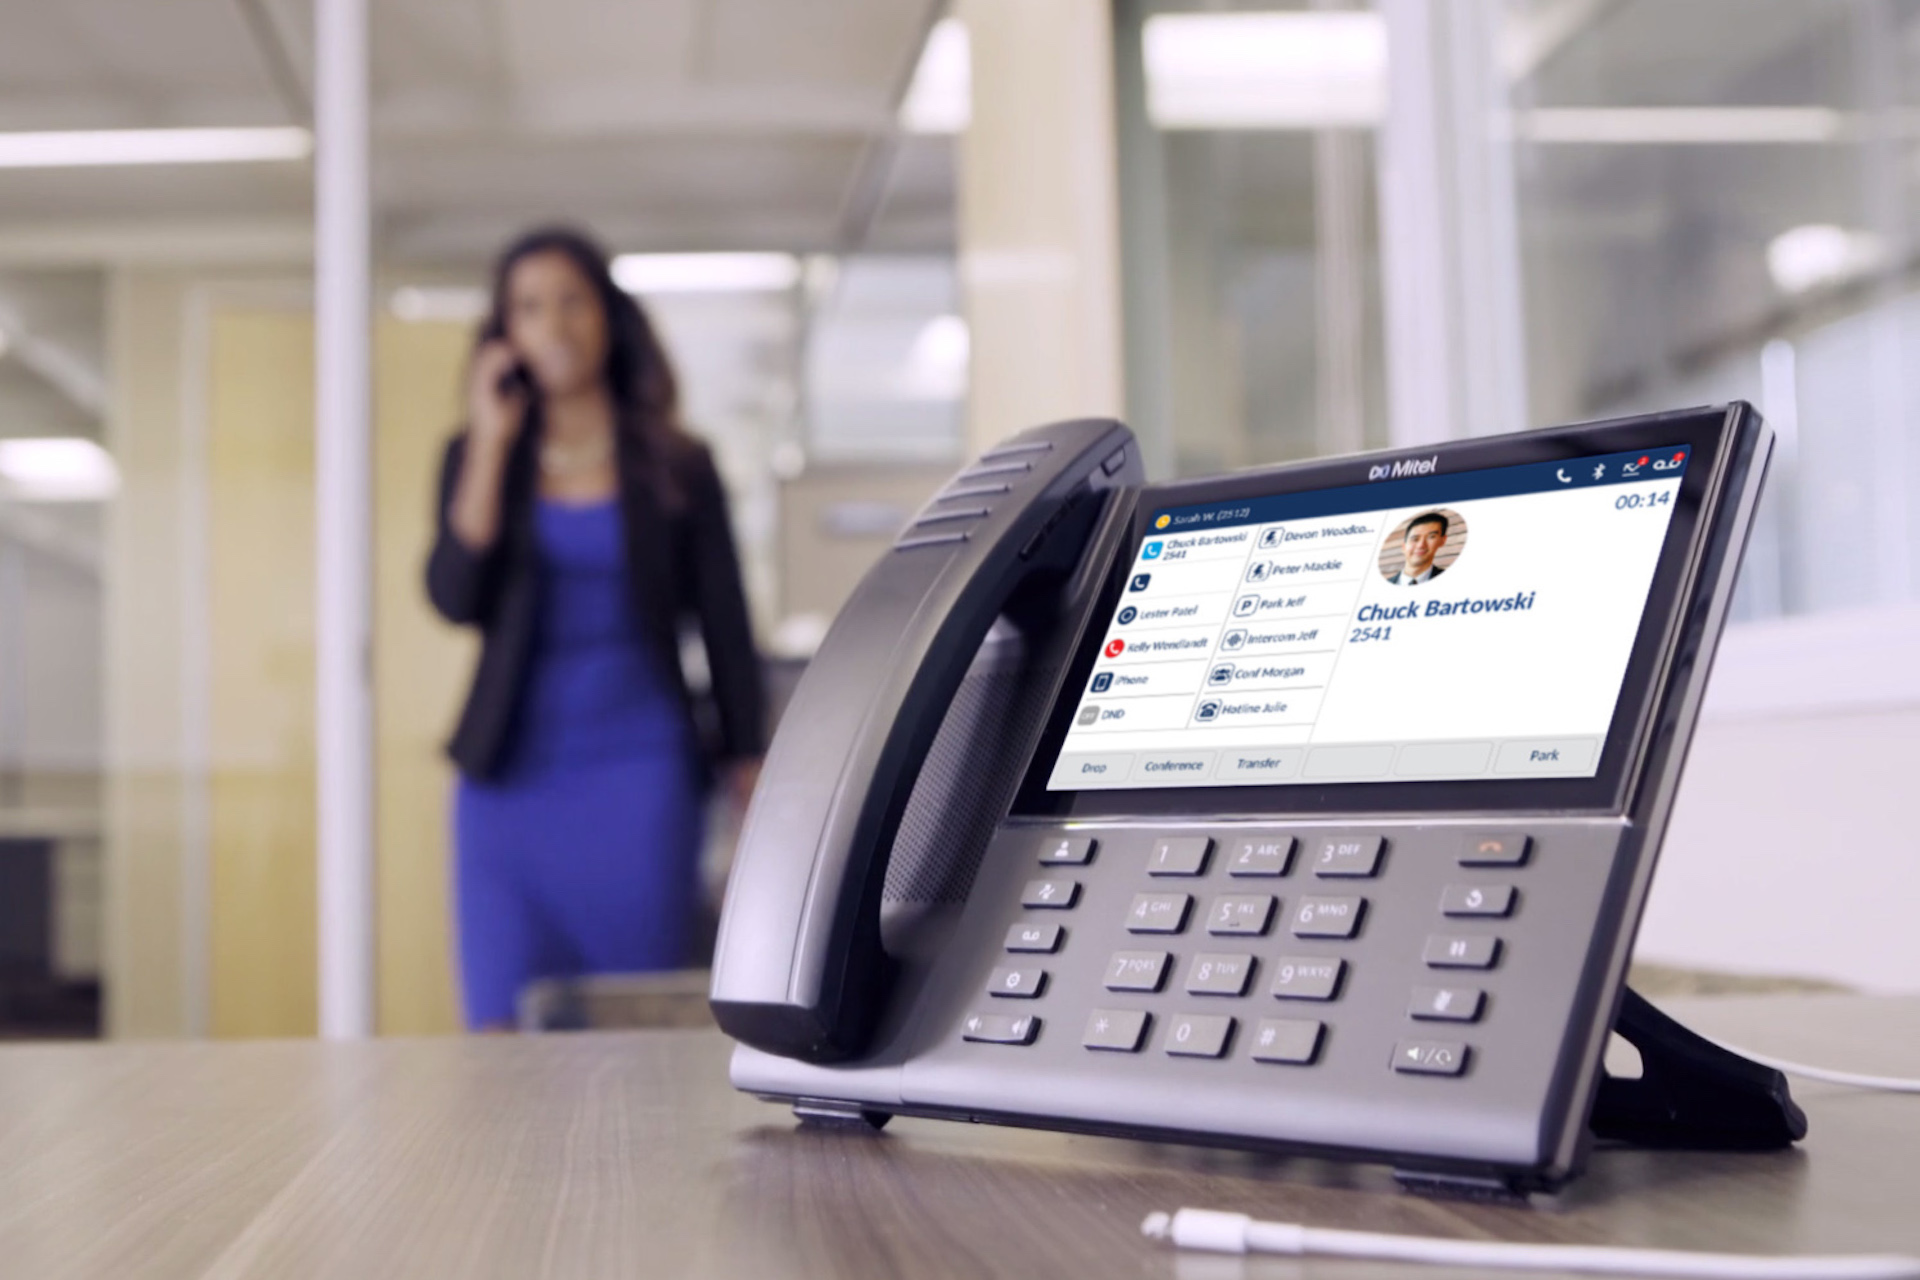 Best Price For Avaya Phone Systems Southampton